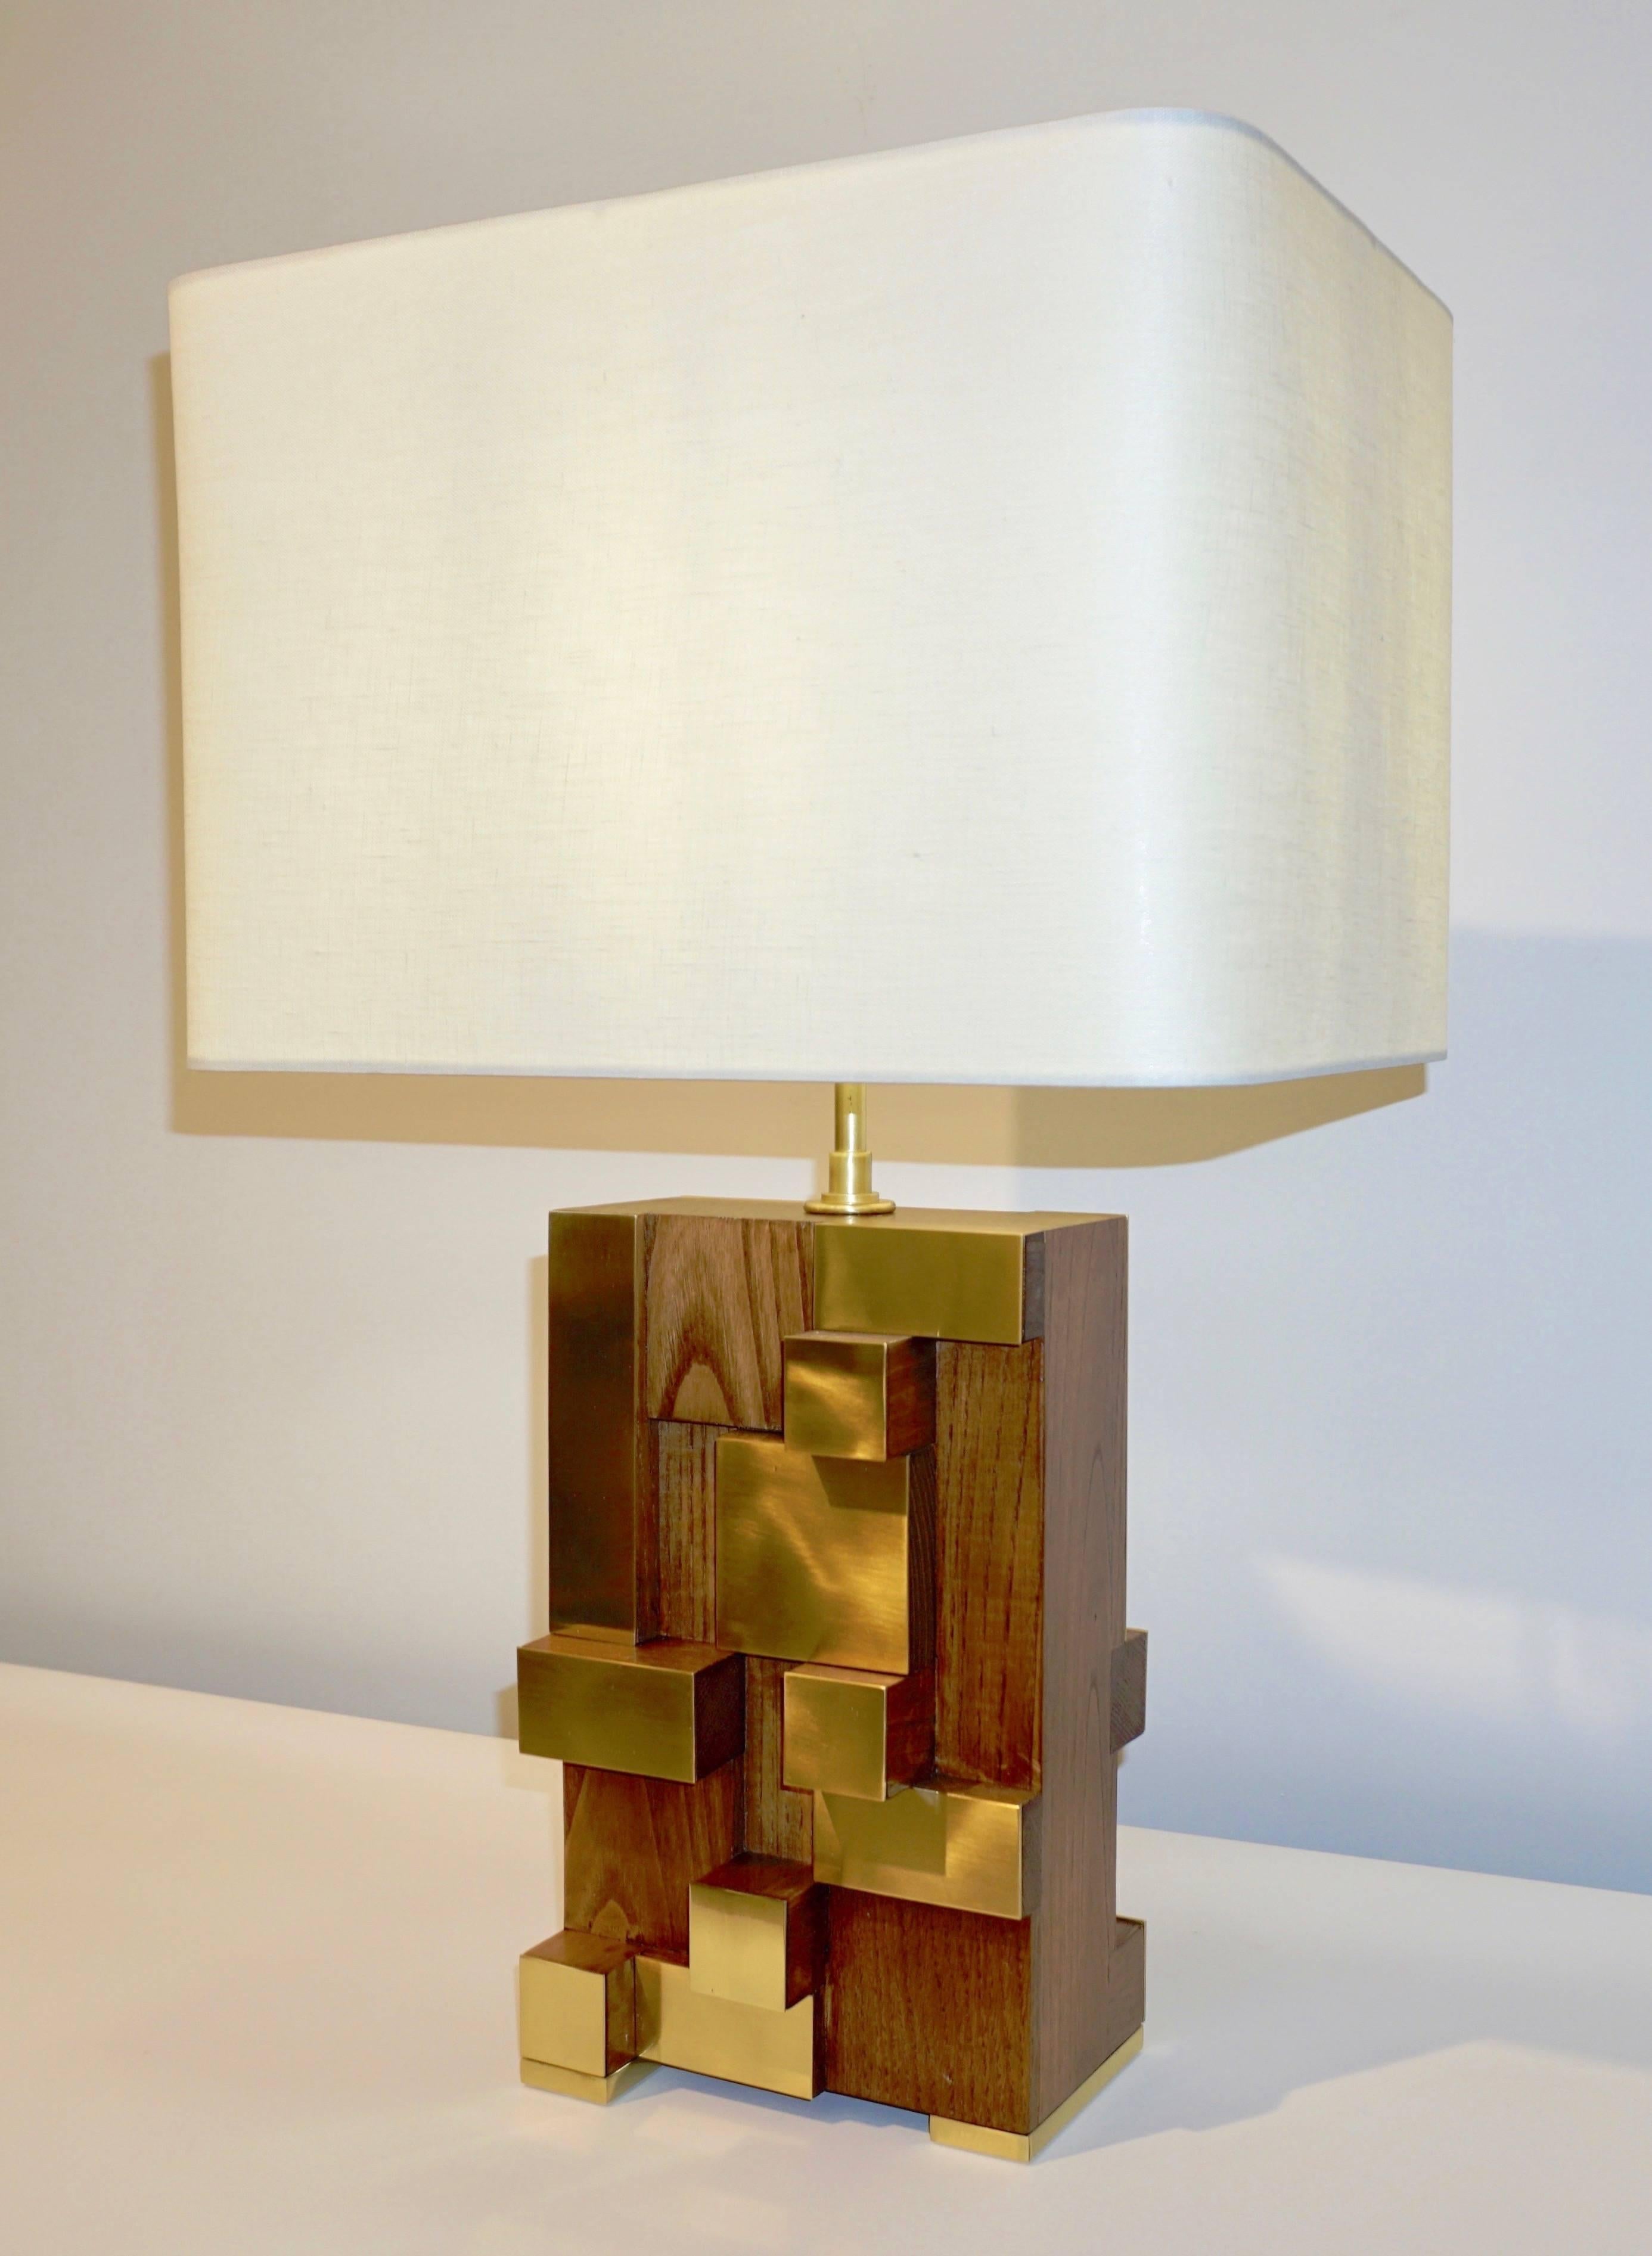 A very interesting Italian Fine Design pair of bespoke Minimalist wood sculpture lamps, entirely handcrafted in walnut and brass, presenting an exclusive modern geometric Design with a very unique Urban inspiration accented by the stepped